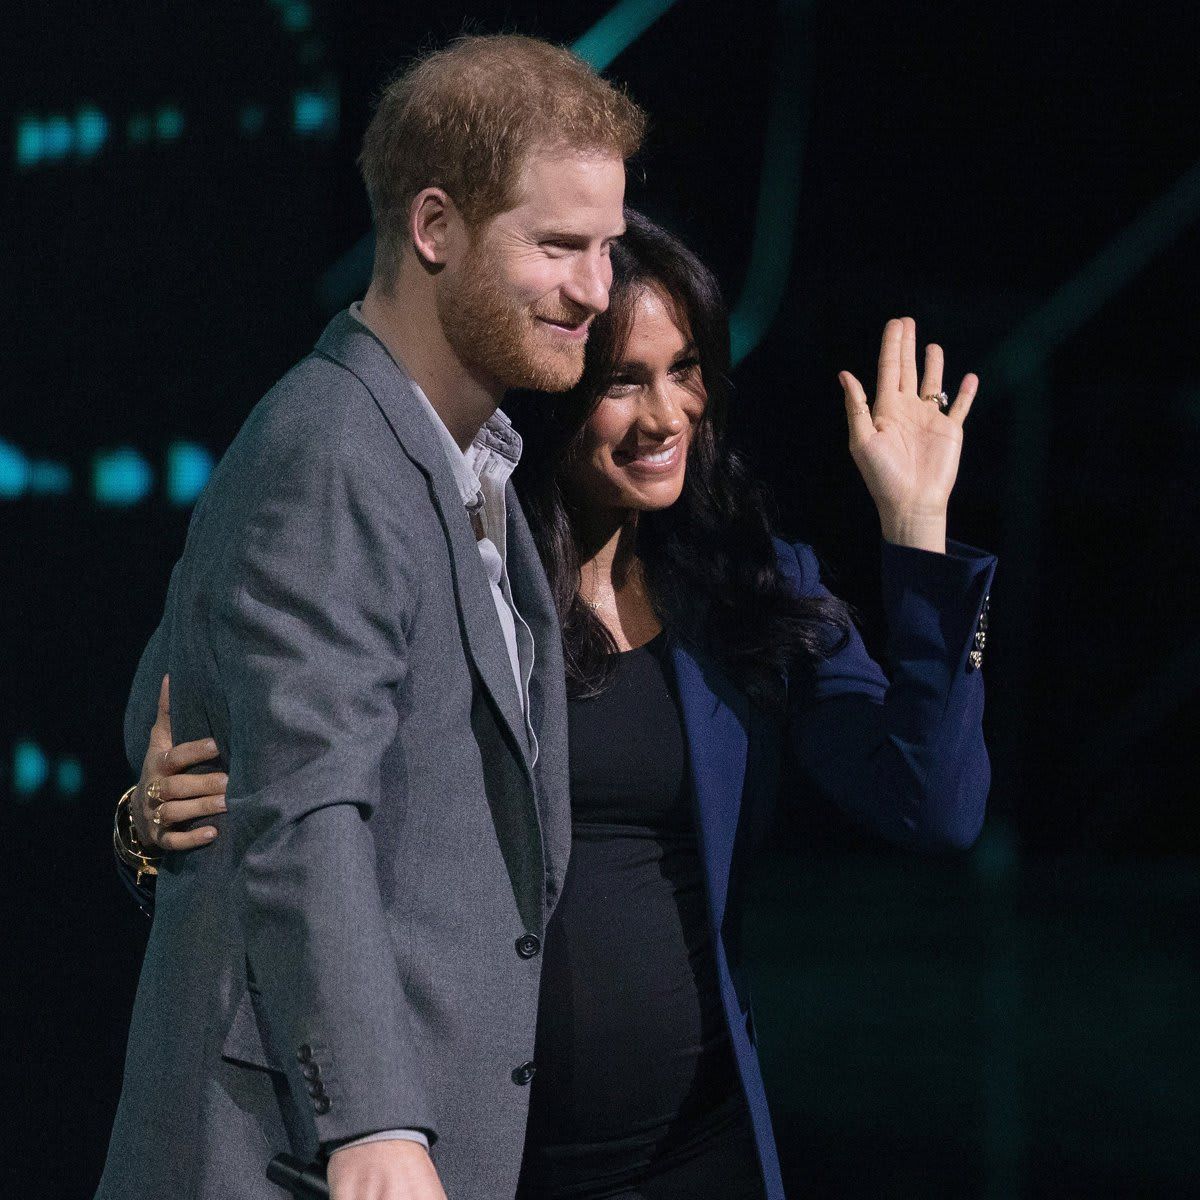 The Duke and Duchess of Sussex are no longer working members of the royal family